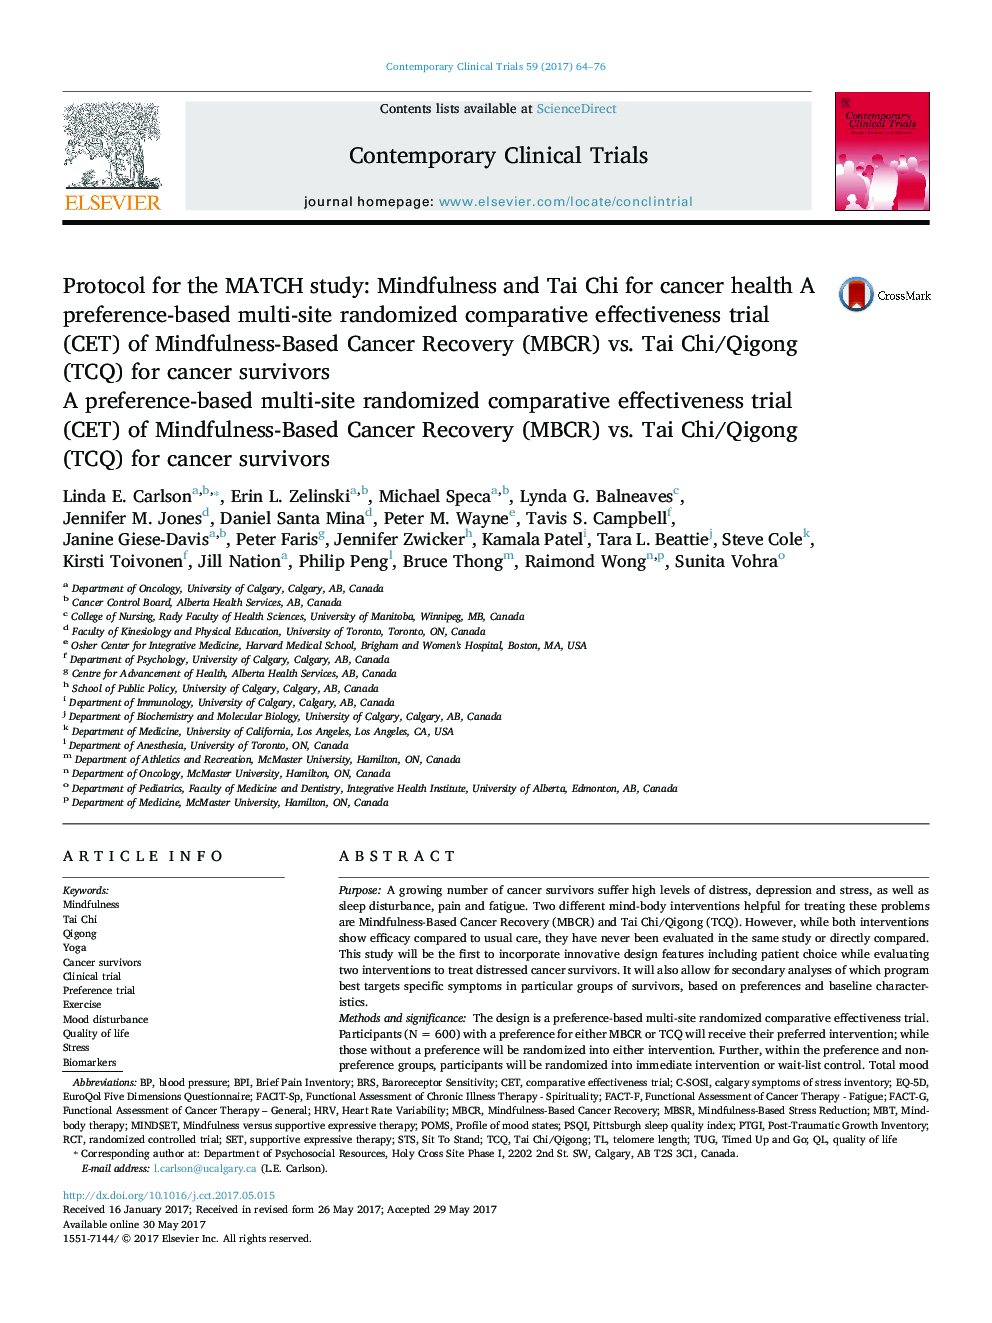 Protocol for the MATCH study (Mindfulness and Tai Chi for cancer health): A preference-based multi-site randomized comparative effectiveness trial (CET) of Mindfulness-Based Cancer Recovery (MBCR) vs. Tai Chi/Qigong (TCQ) for cancer survivors